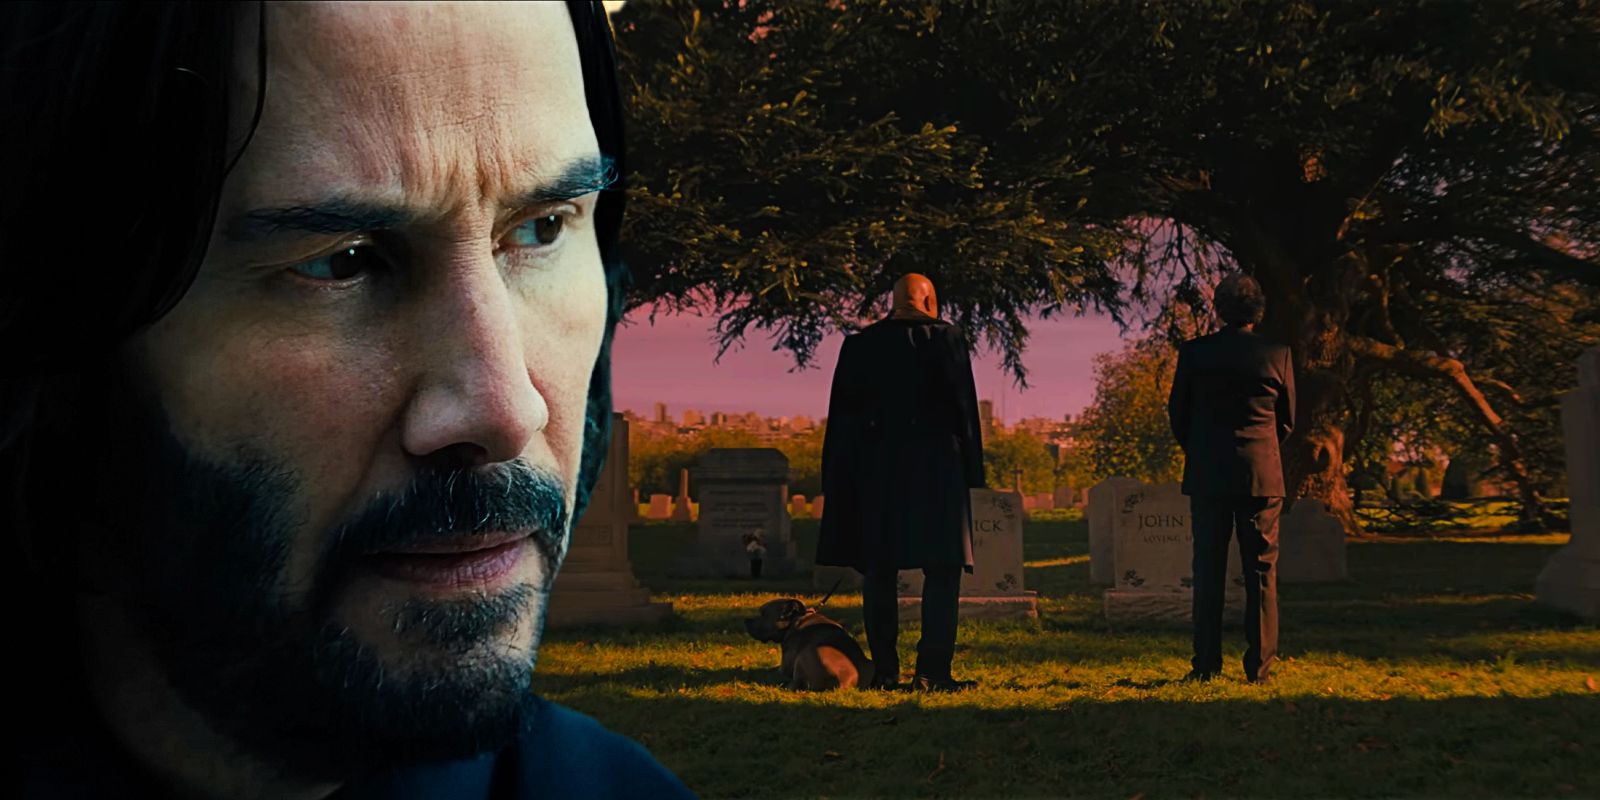 This collage shows John Wick next to his gravesite.